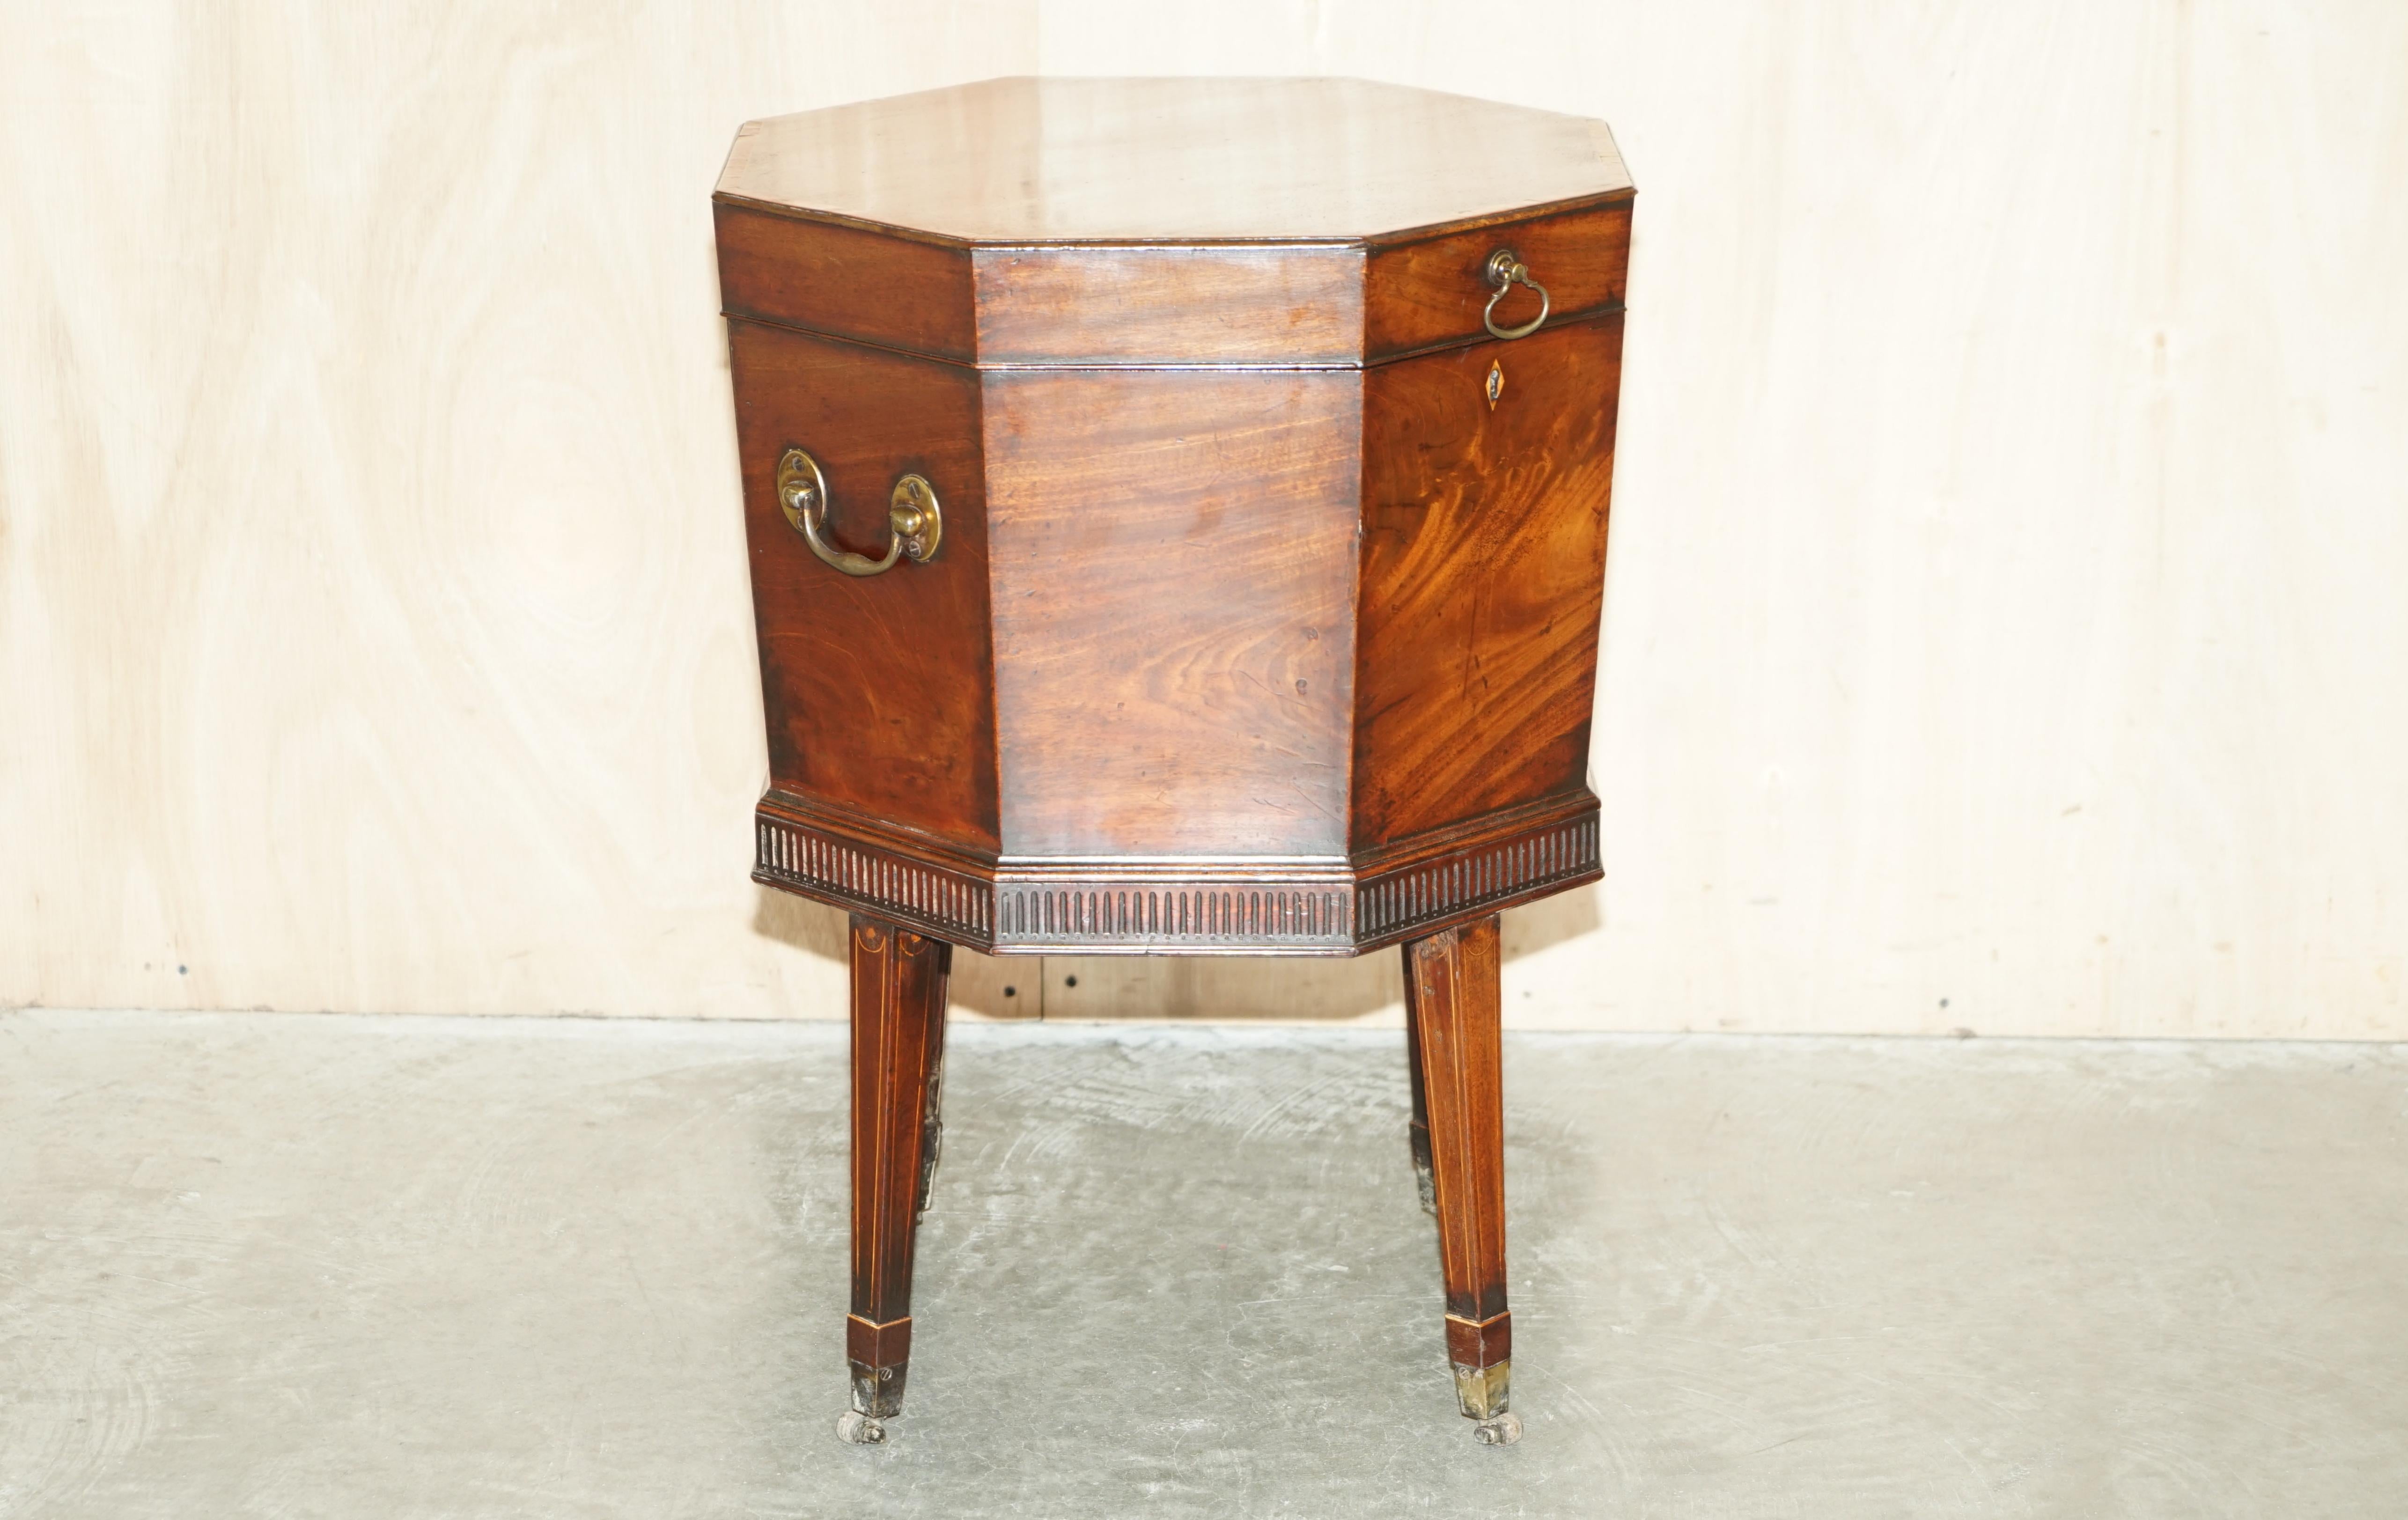 We are delighted to offer for sale this exceptionally rare, fully restored, George III circa 1780-1800, Mahogany Cellarette or Wine cooler with the original zinc lined internal compartments.

A very good looking and well-made piece, it has a nice